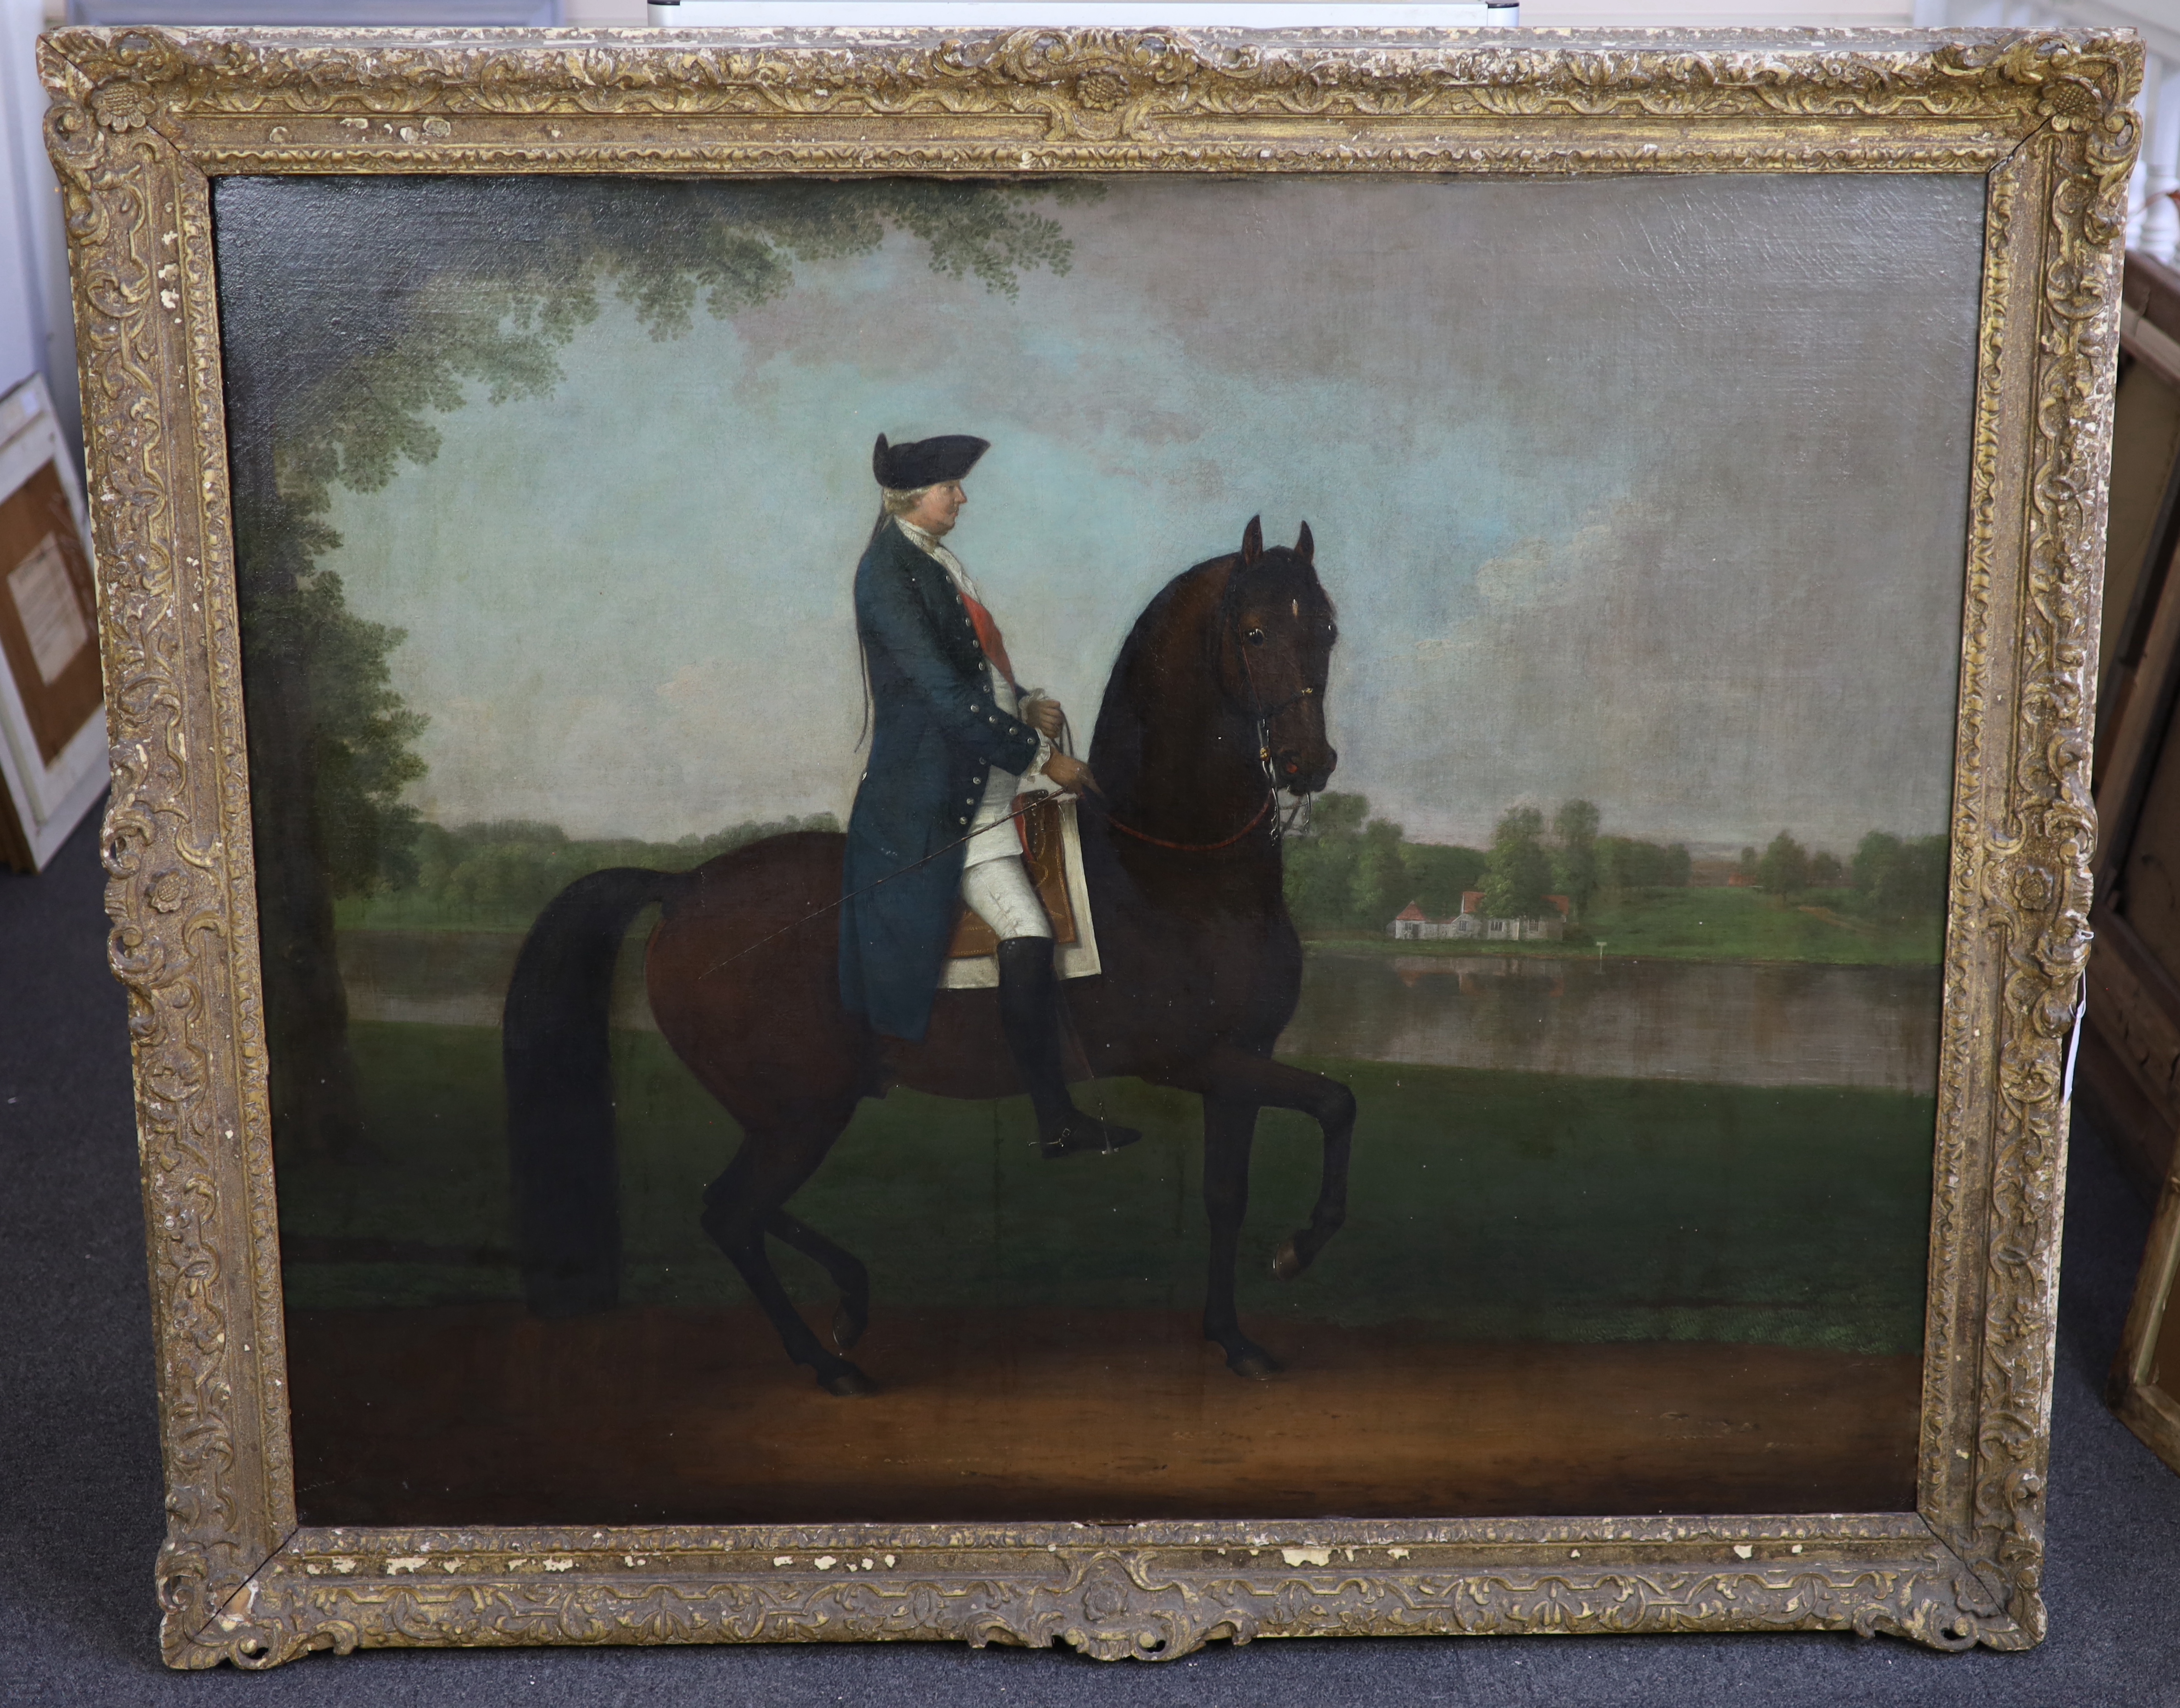 Attributed to David Morier (Anglo-Swiss, 1705-1770), Portrait of the Duke of Cumberland on horseback on a Thames towpath, oil on canvas, 100 x 122cm